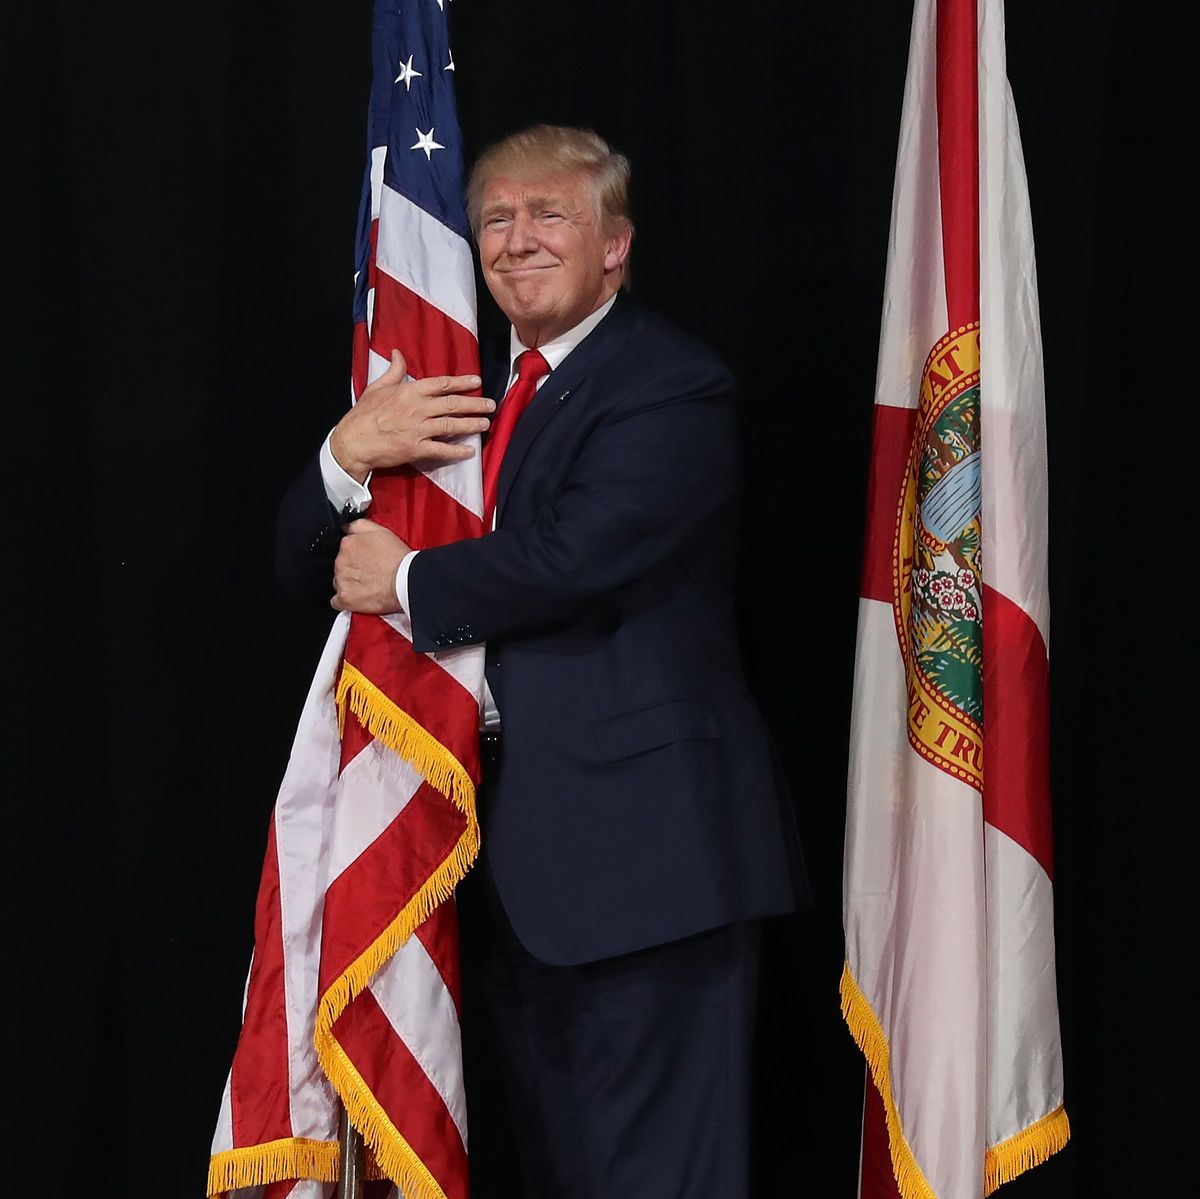 https://hips.hearstapps.com/hmg-prod/images/republican-presidential-candidate-donald-trump-hugs-the-news-photo-617806568-1560614003.jpg?crop=0.777xw:1.00xh;0.111xw,0&resize=1200:*